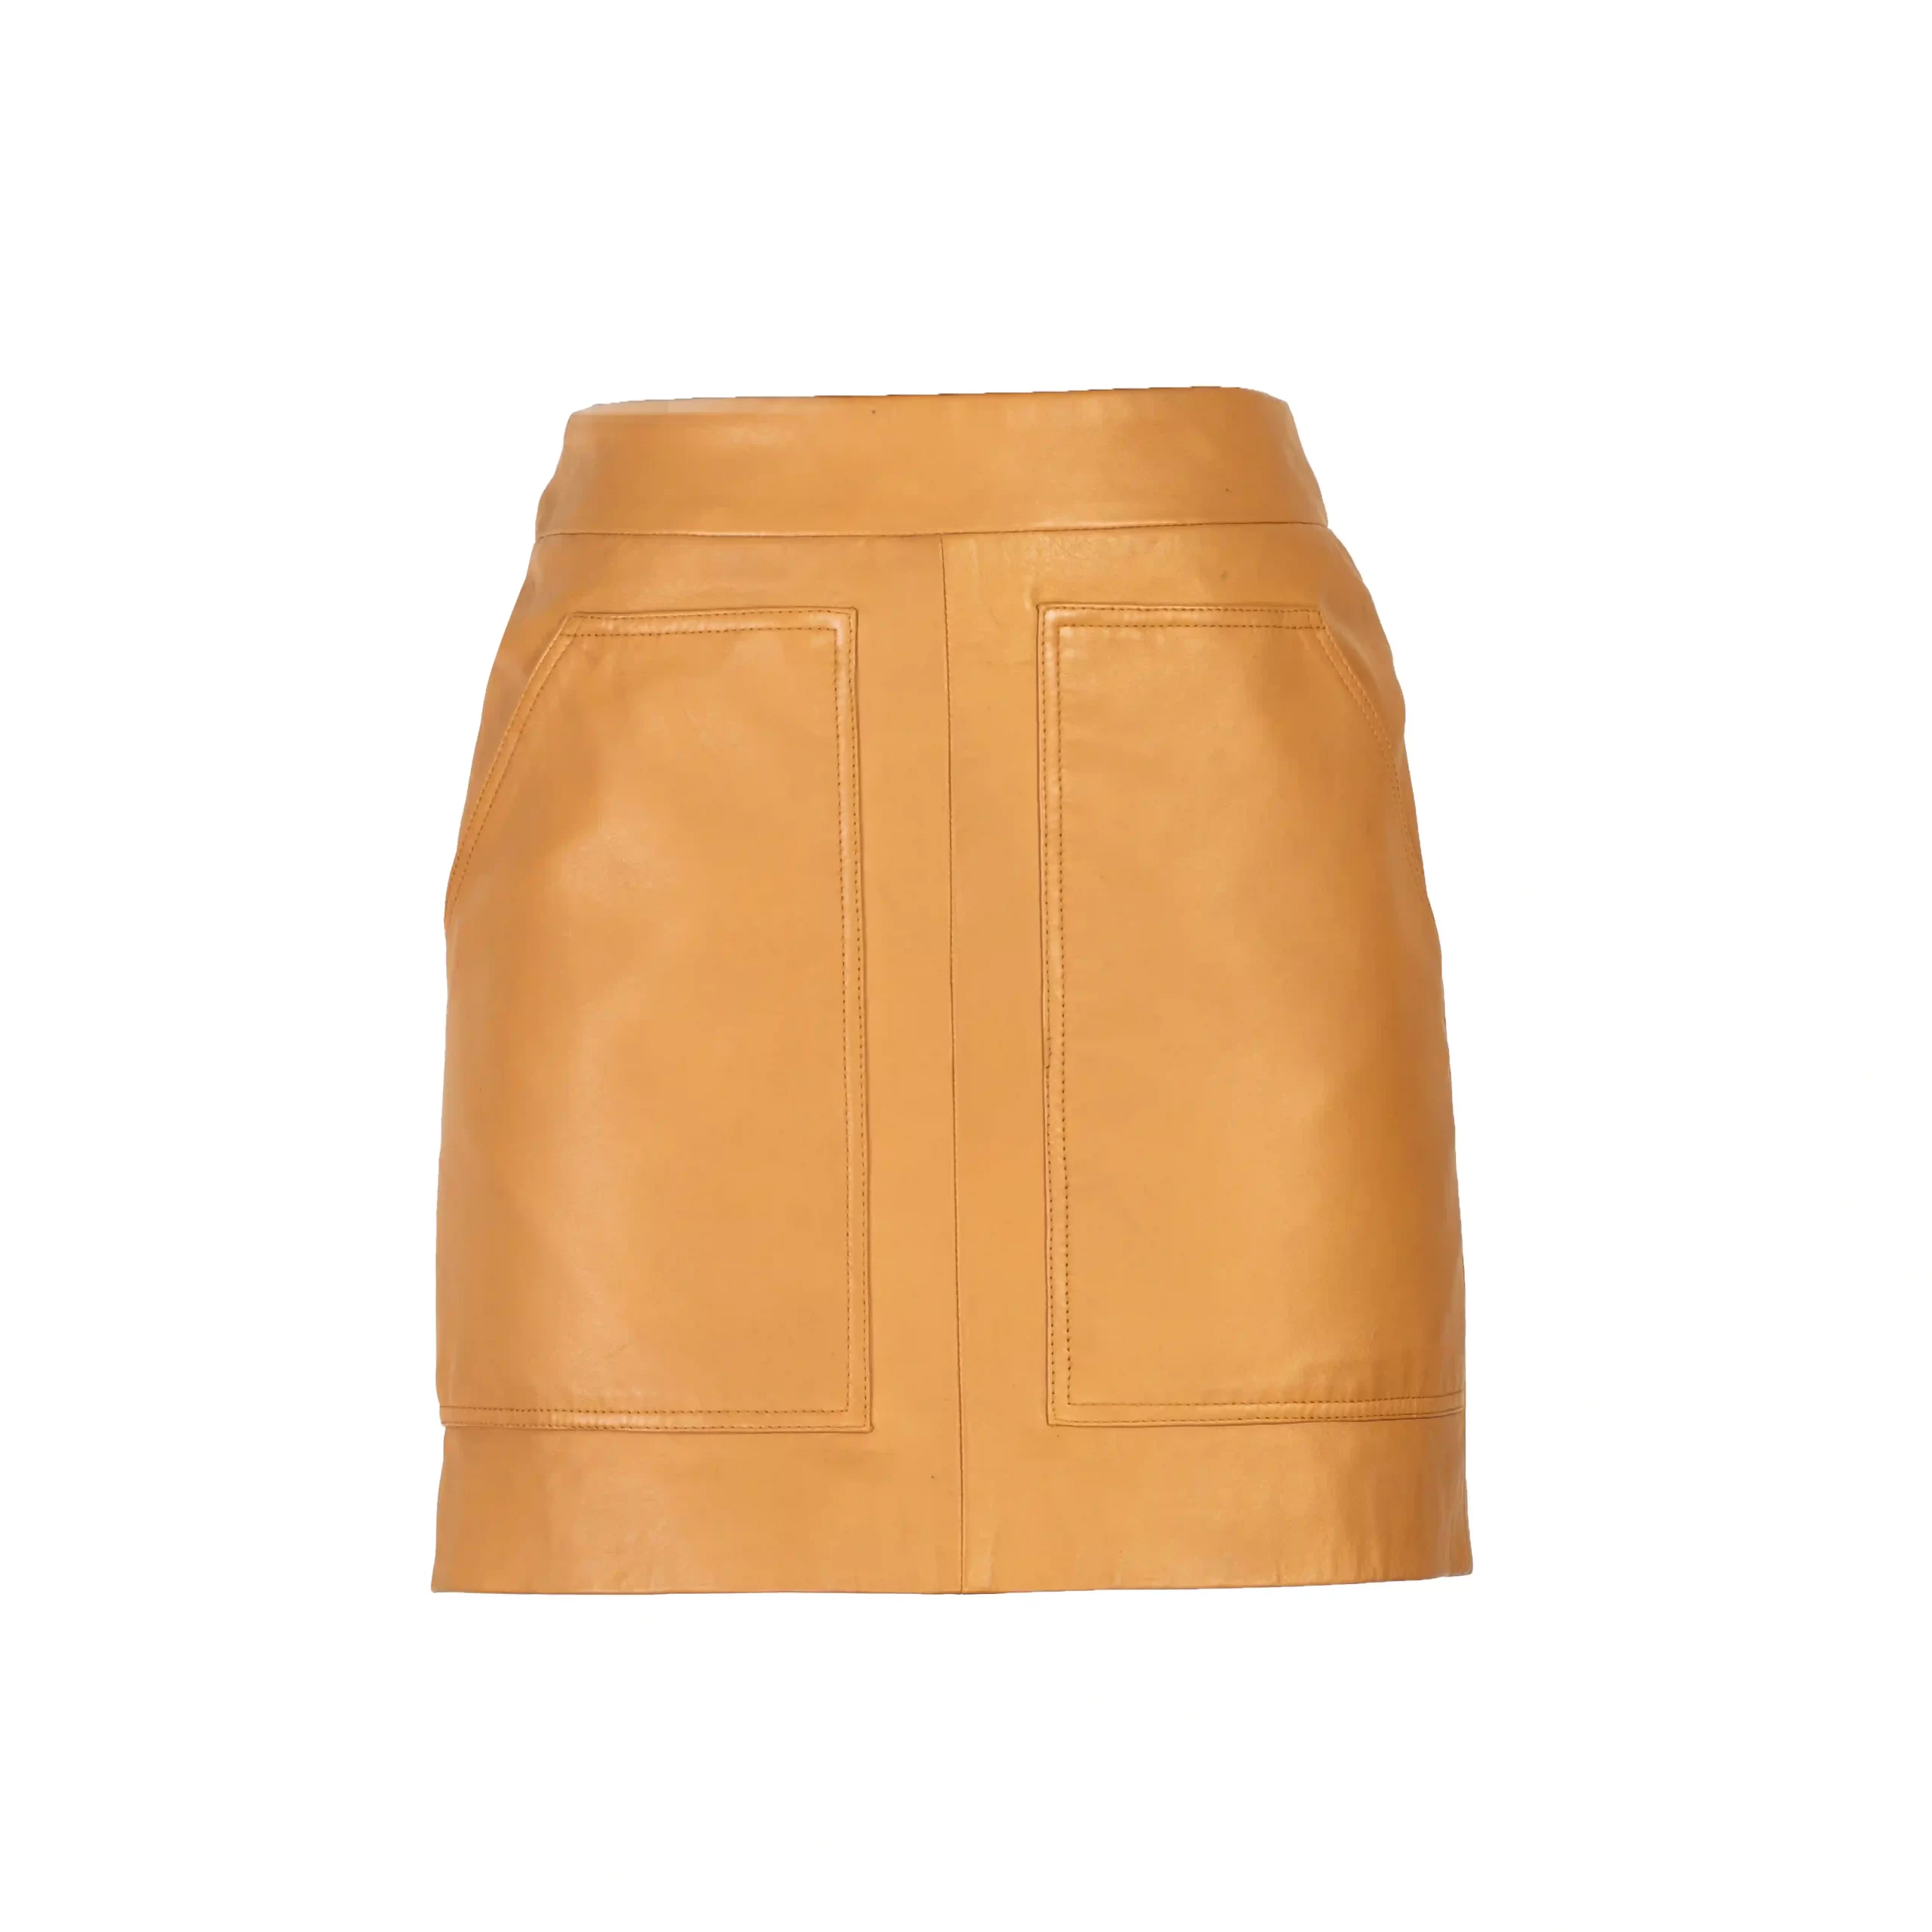 LEATHER SKIRT WITH BIG POCKETS